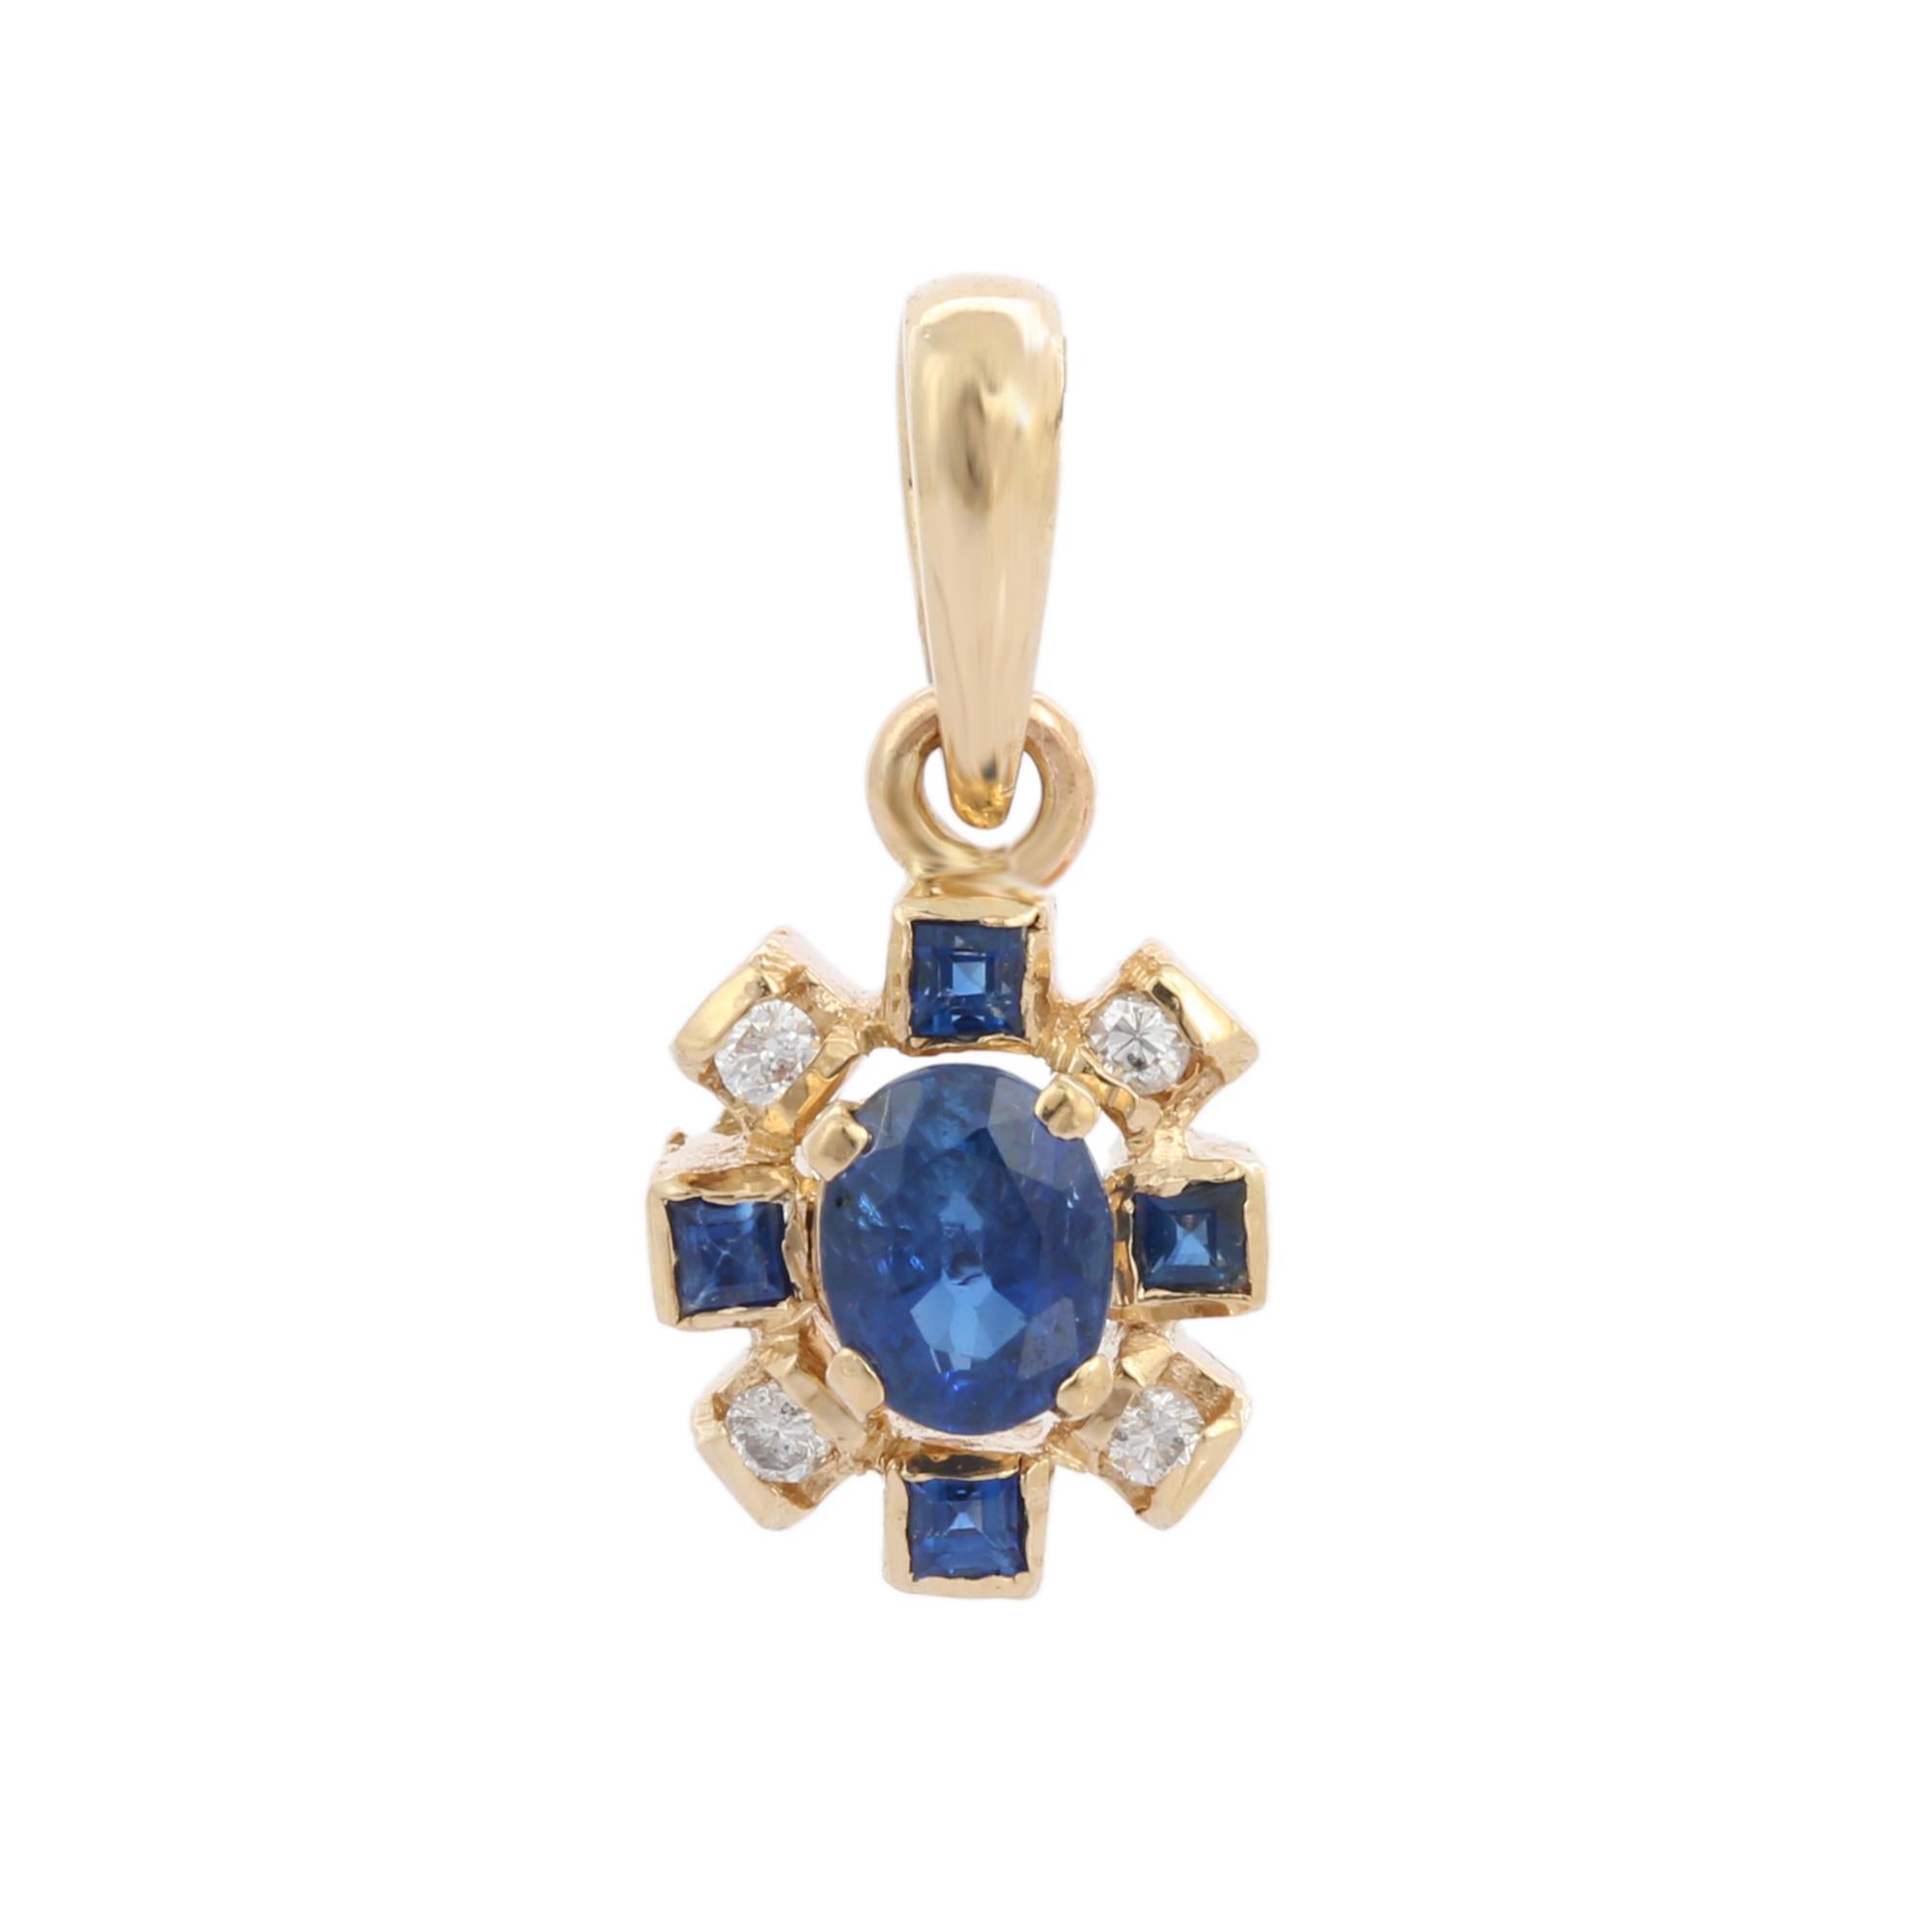 Natural Blue Sapphire pendant in 14K Gold. It has square and oval cut sapphires studded with diamonds that completes your look with a decent touch. Pendants are used to wear or gifted to represent love and promises. It's an attractive jewelry piece